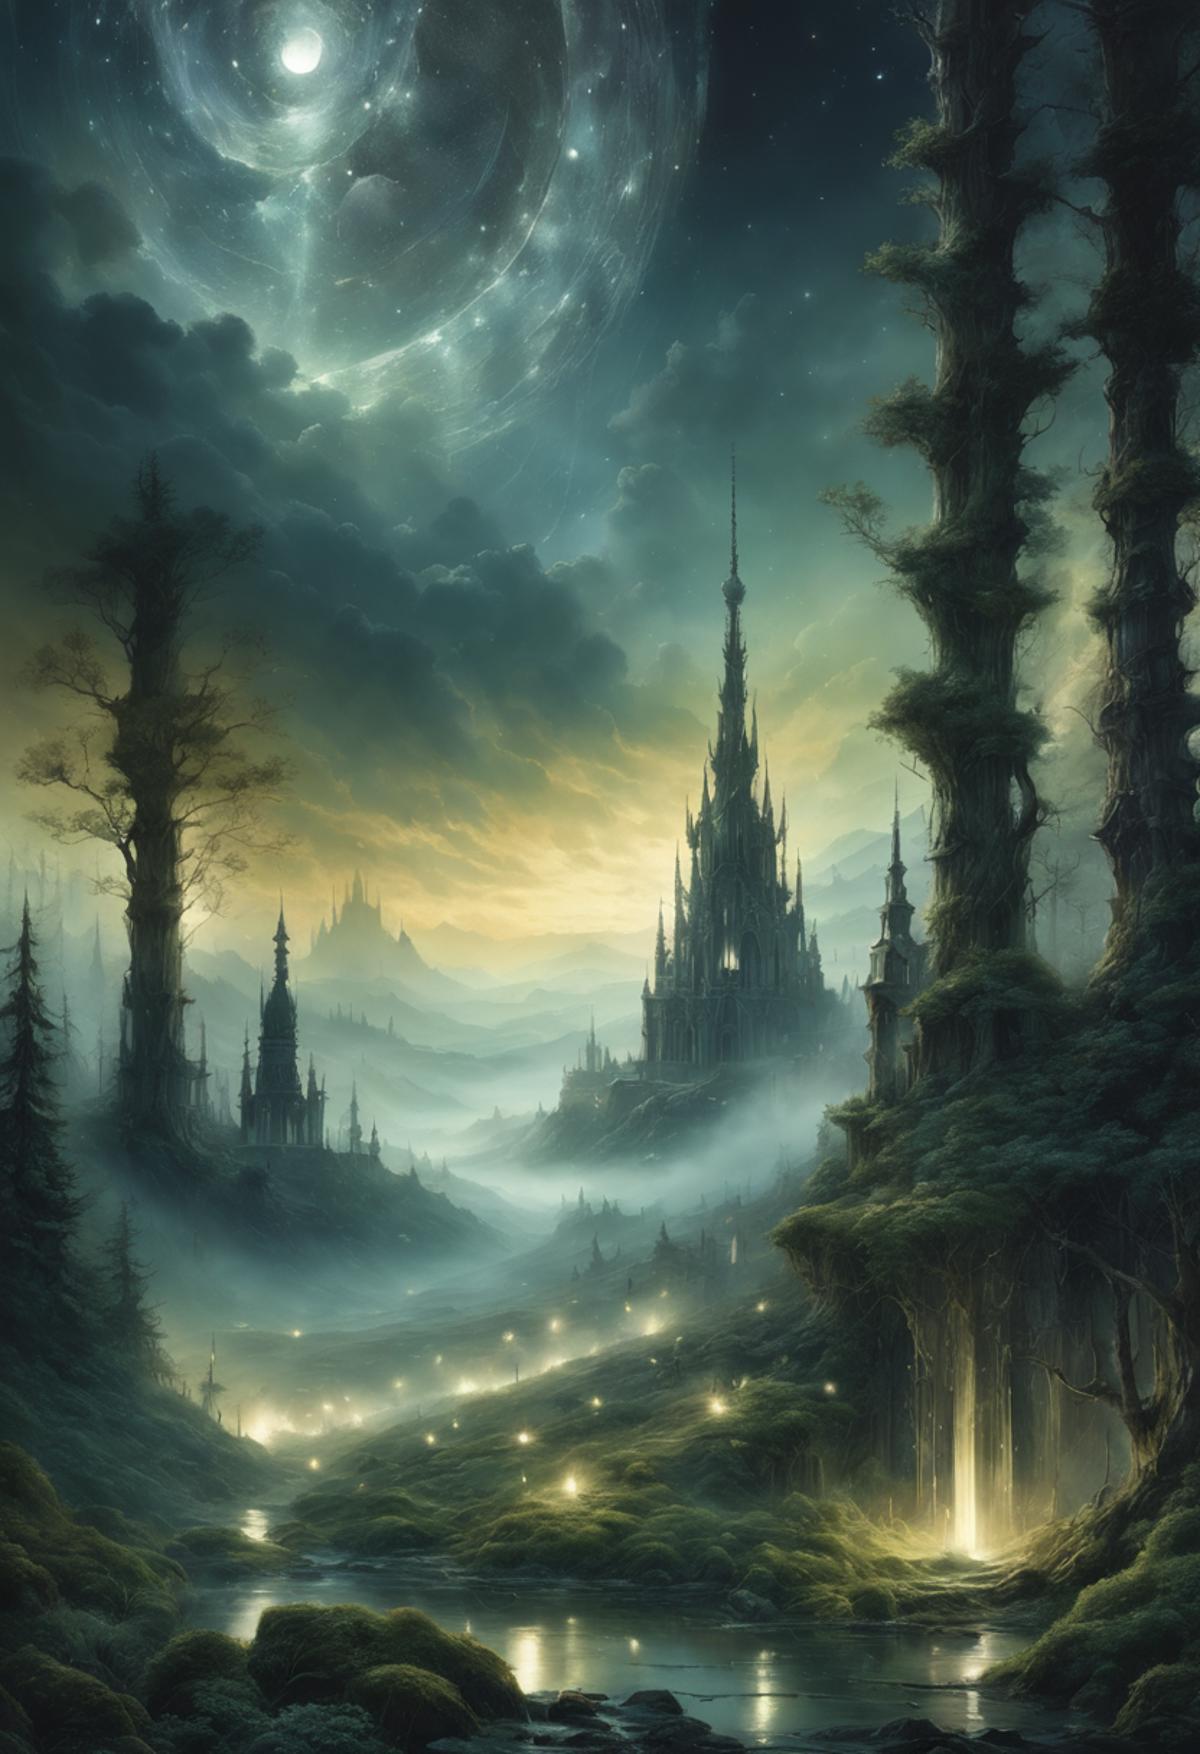 "Fantasy Landscape with a Castle and Trees"